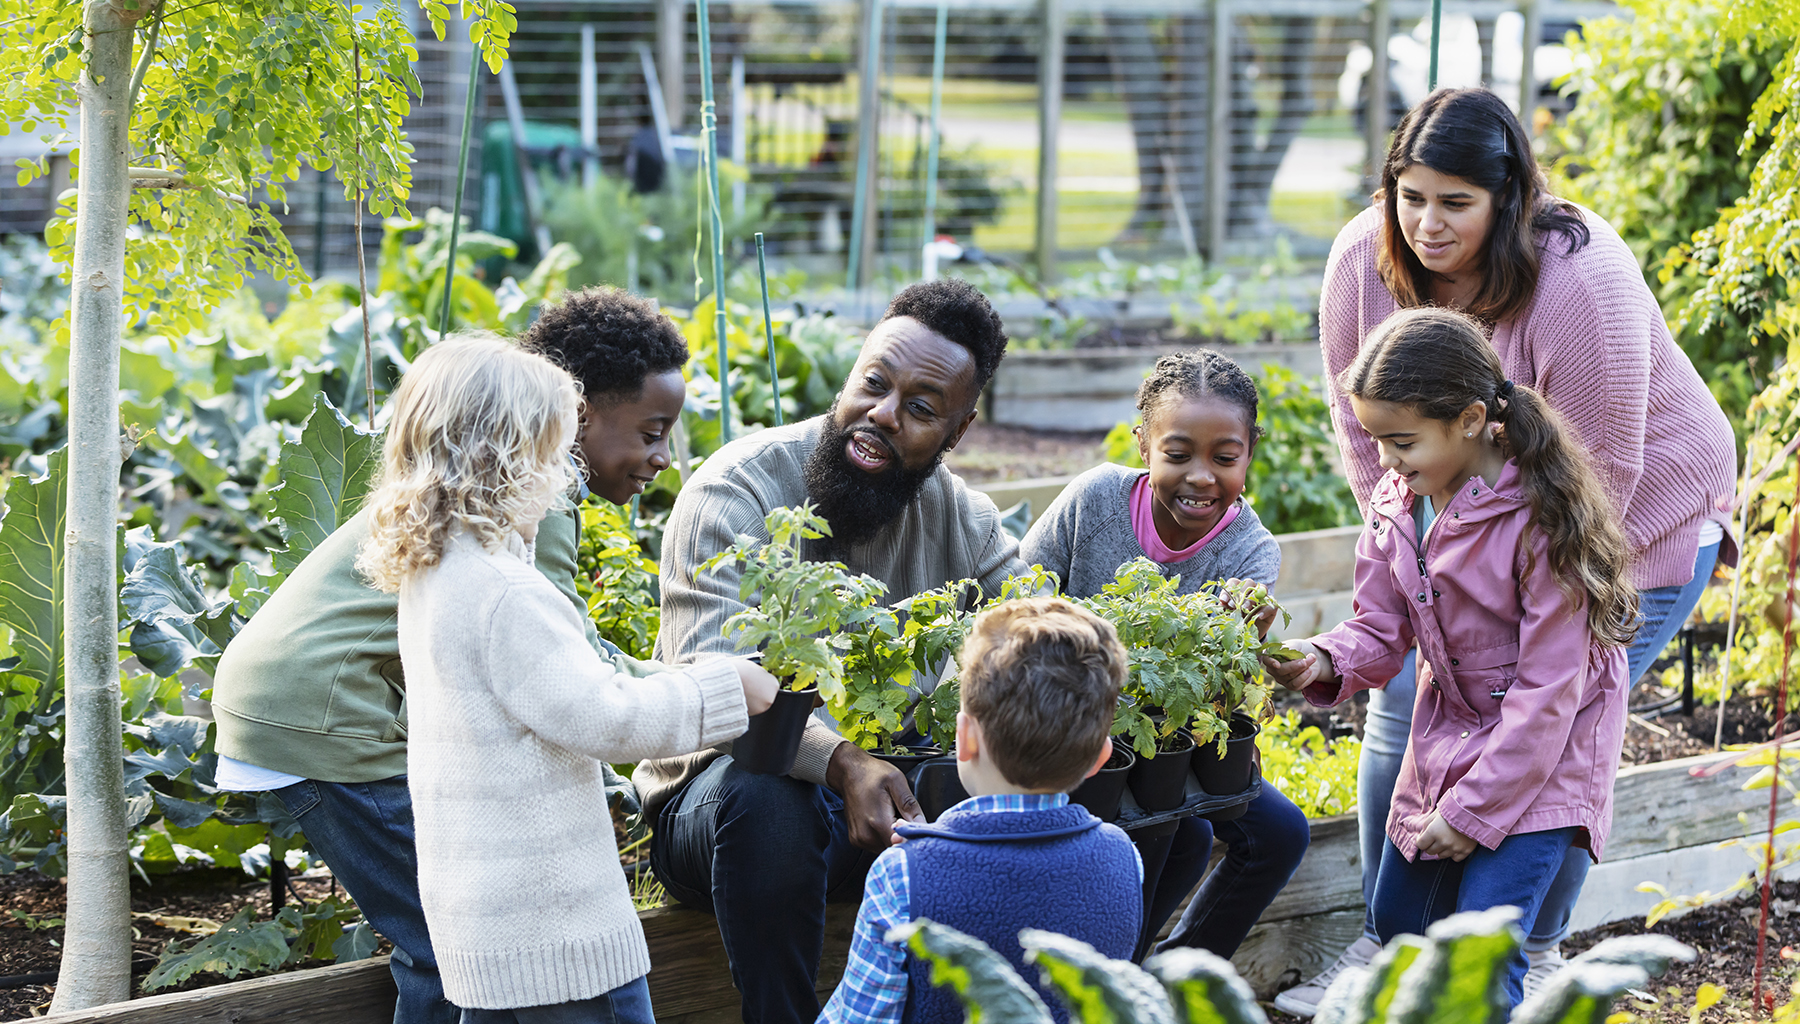 Children and adults gardening